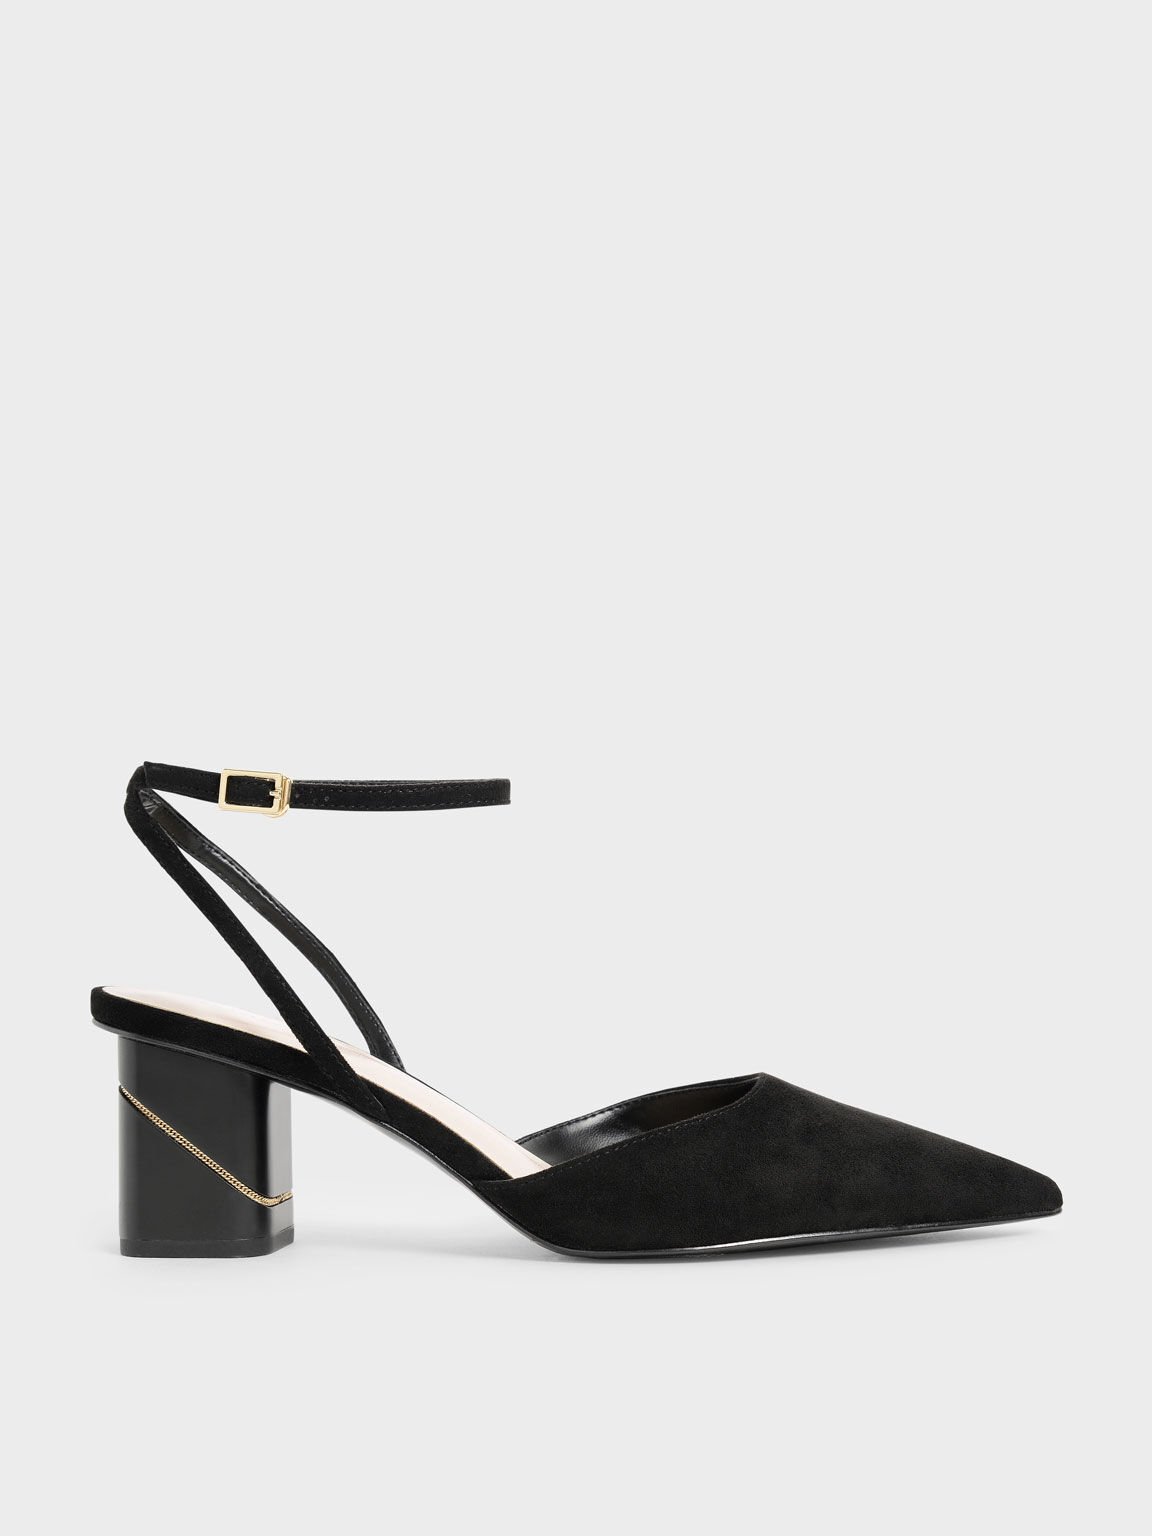 Textured Ankle Strap Pointed Toe Pumps, Black, hi-res